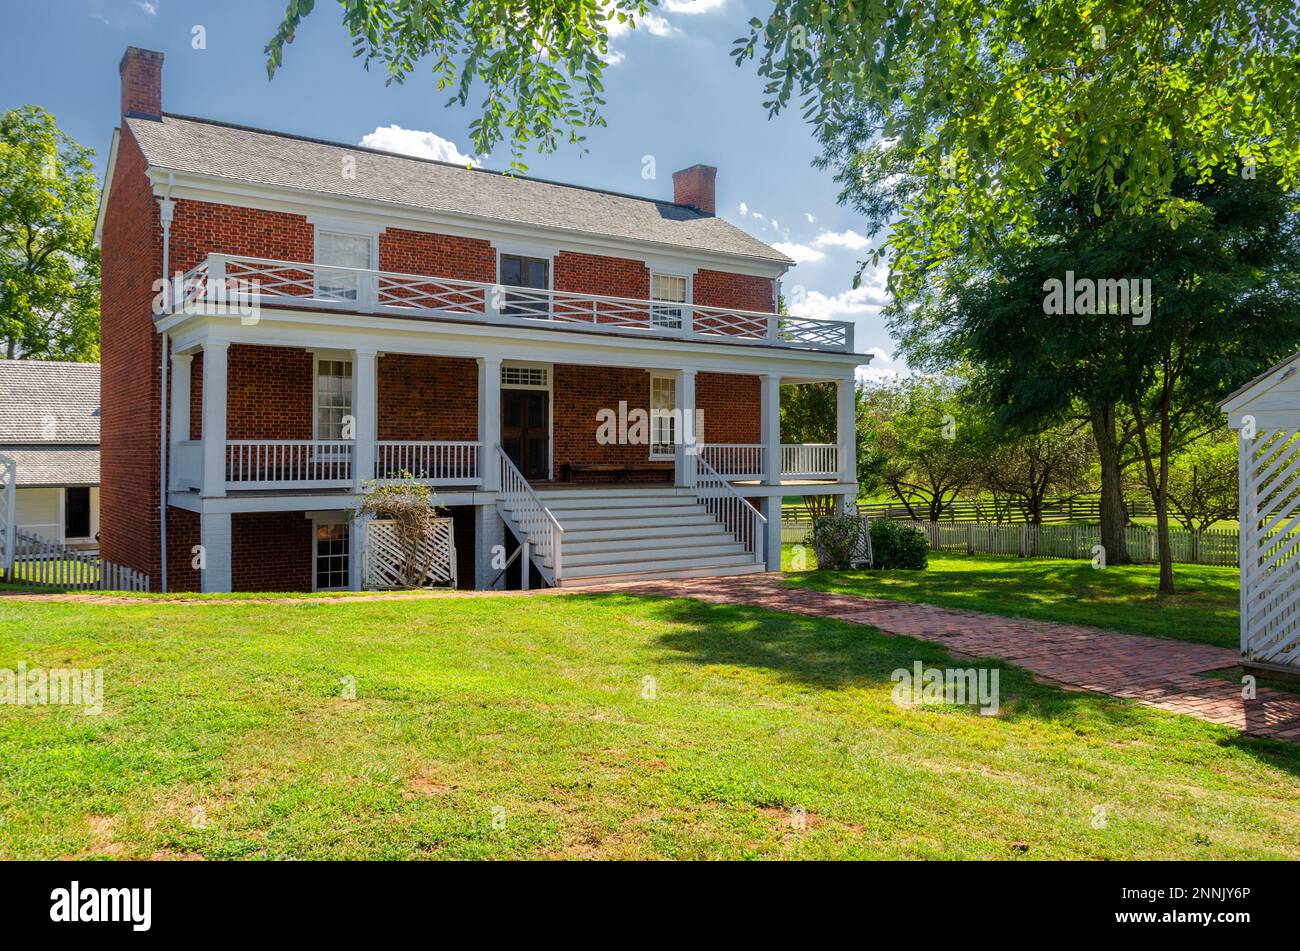 McLean House, Place Where General Lee Surrendered to General Grant, to End the Civil War. Appomattox Court House, Virginia Stock Photo